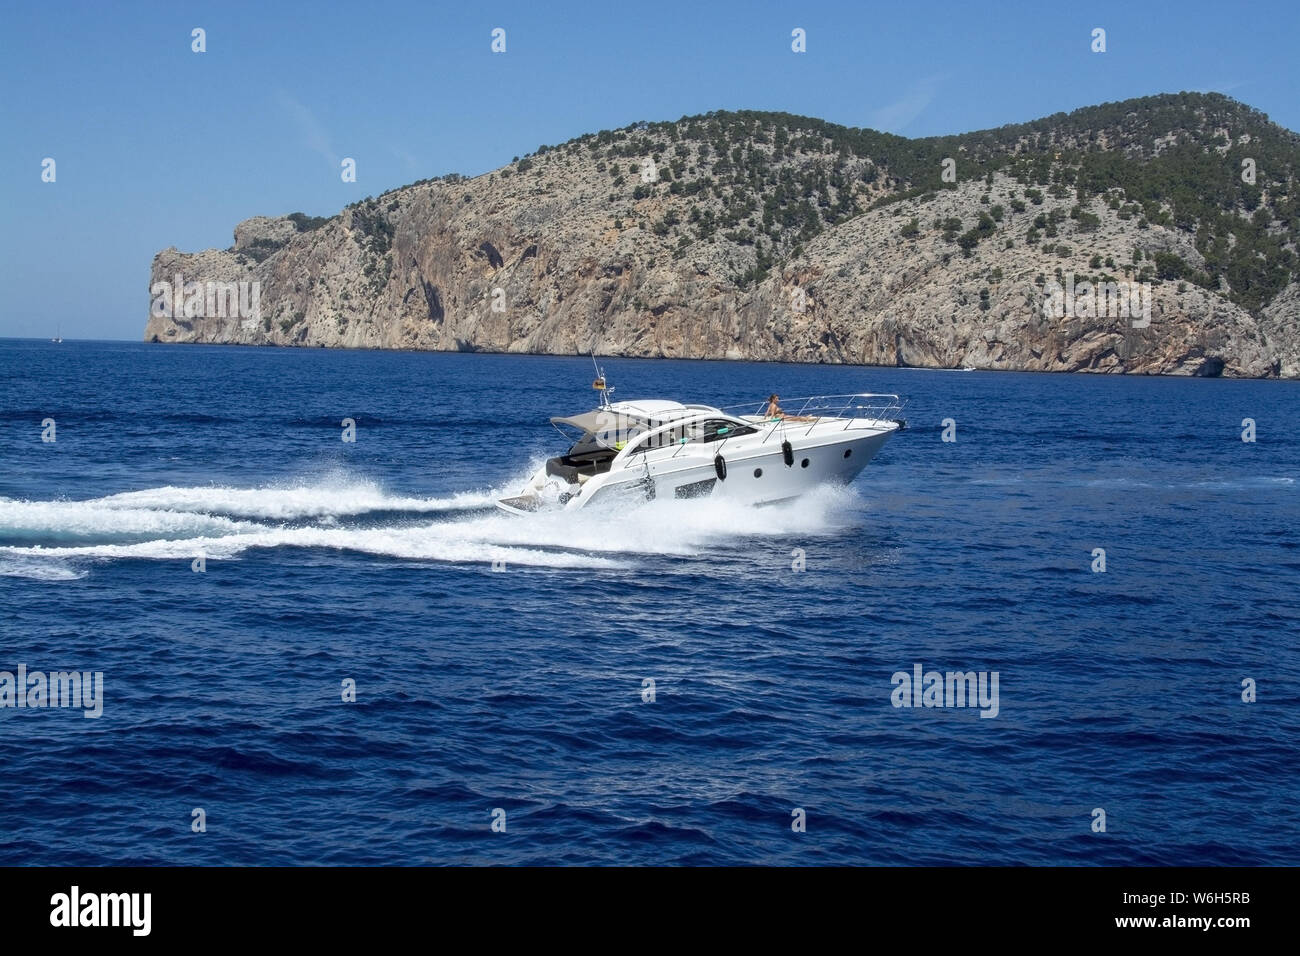 MALLORCA, SPAIN - JUNE 23, 2019: Motor boat with woman speeding making foamy waves on a sunny day on June 23, 2019 in Mallorca, Spain. Stock Photo